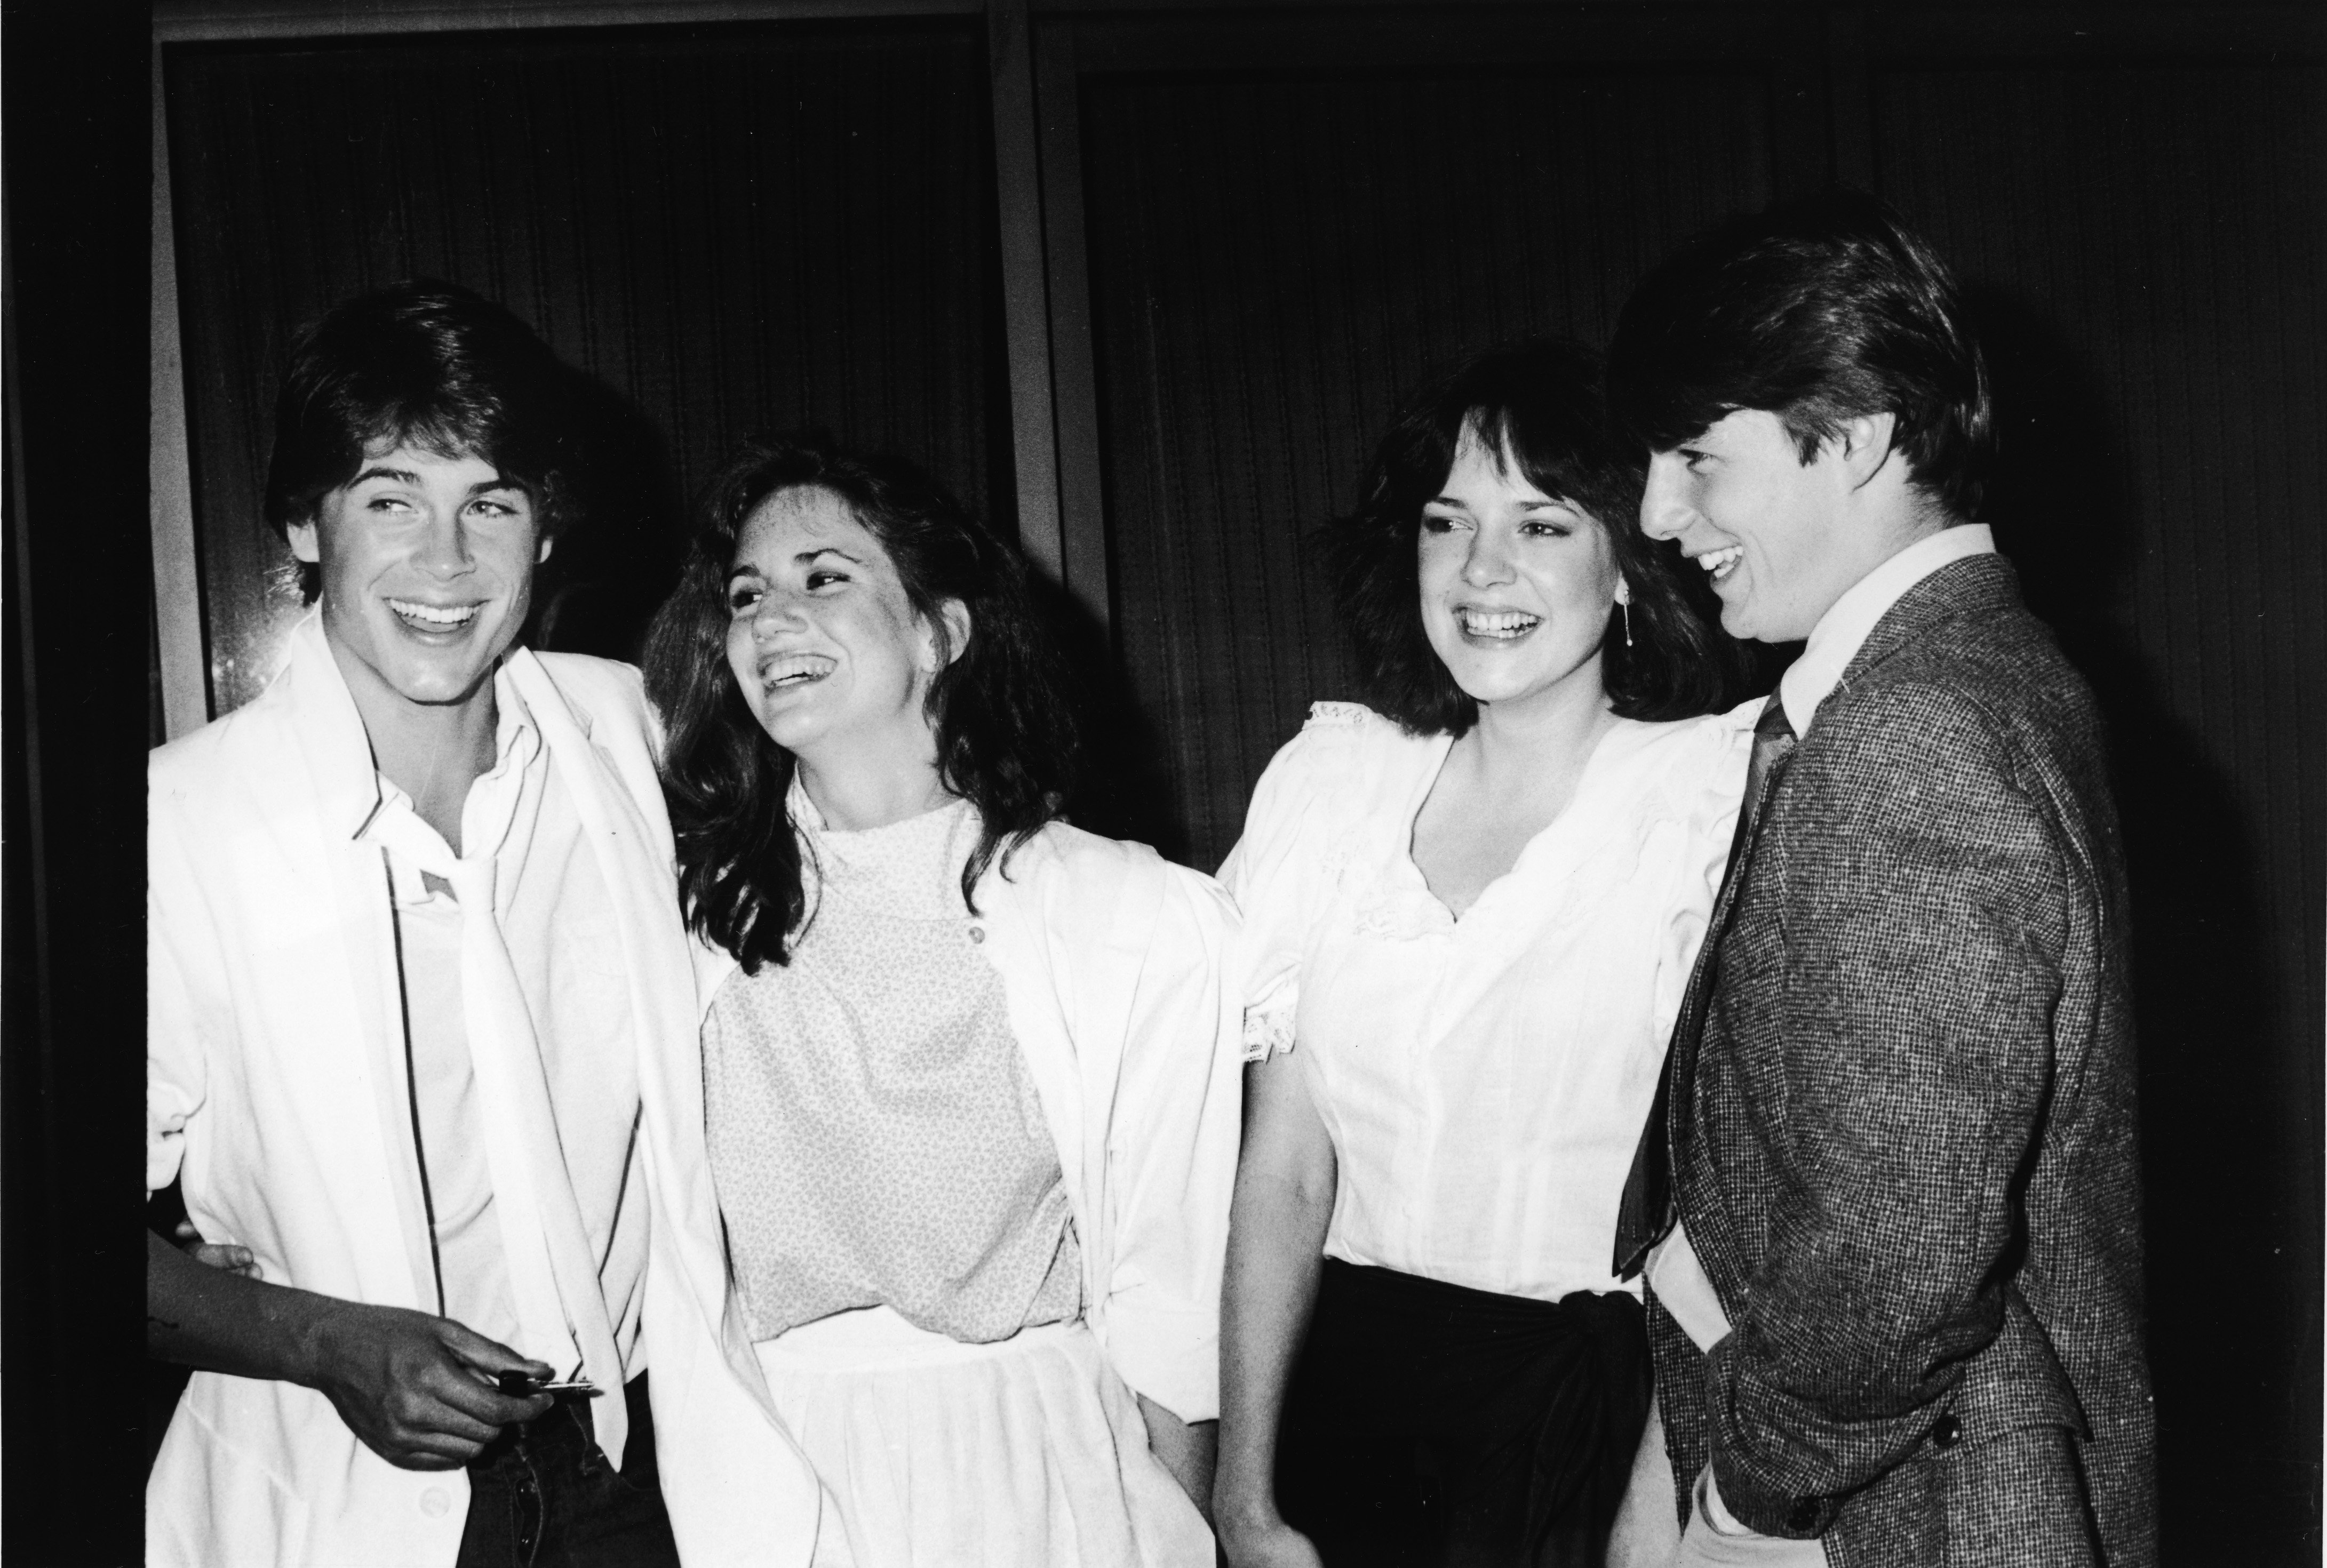 Rob Lowe, Melissa Gilbert, Michelle Meyrink and Tom Cruise